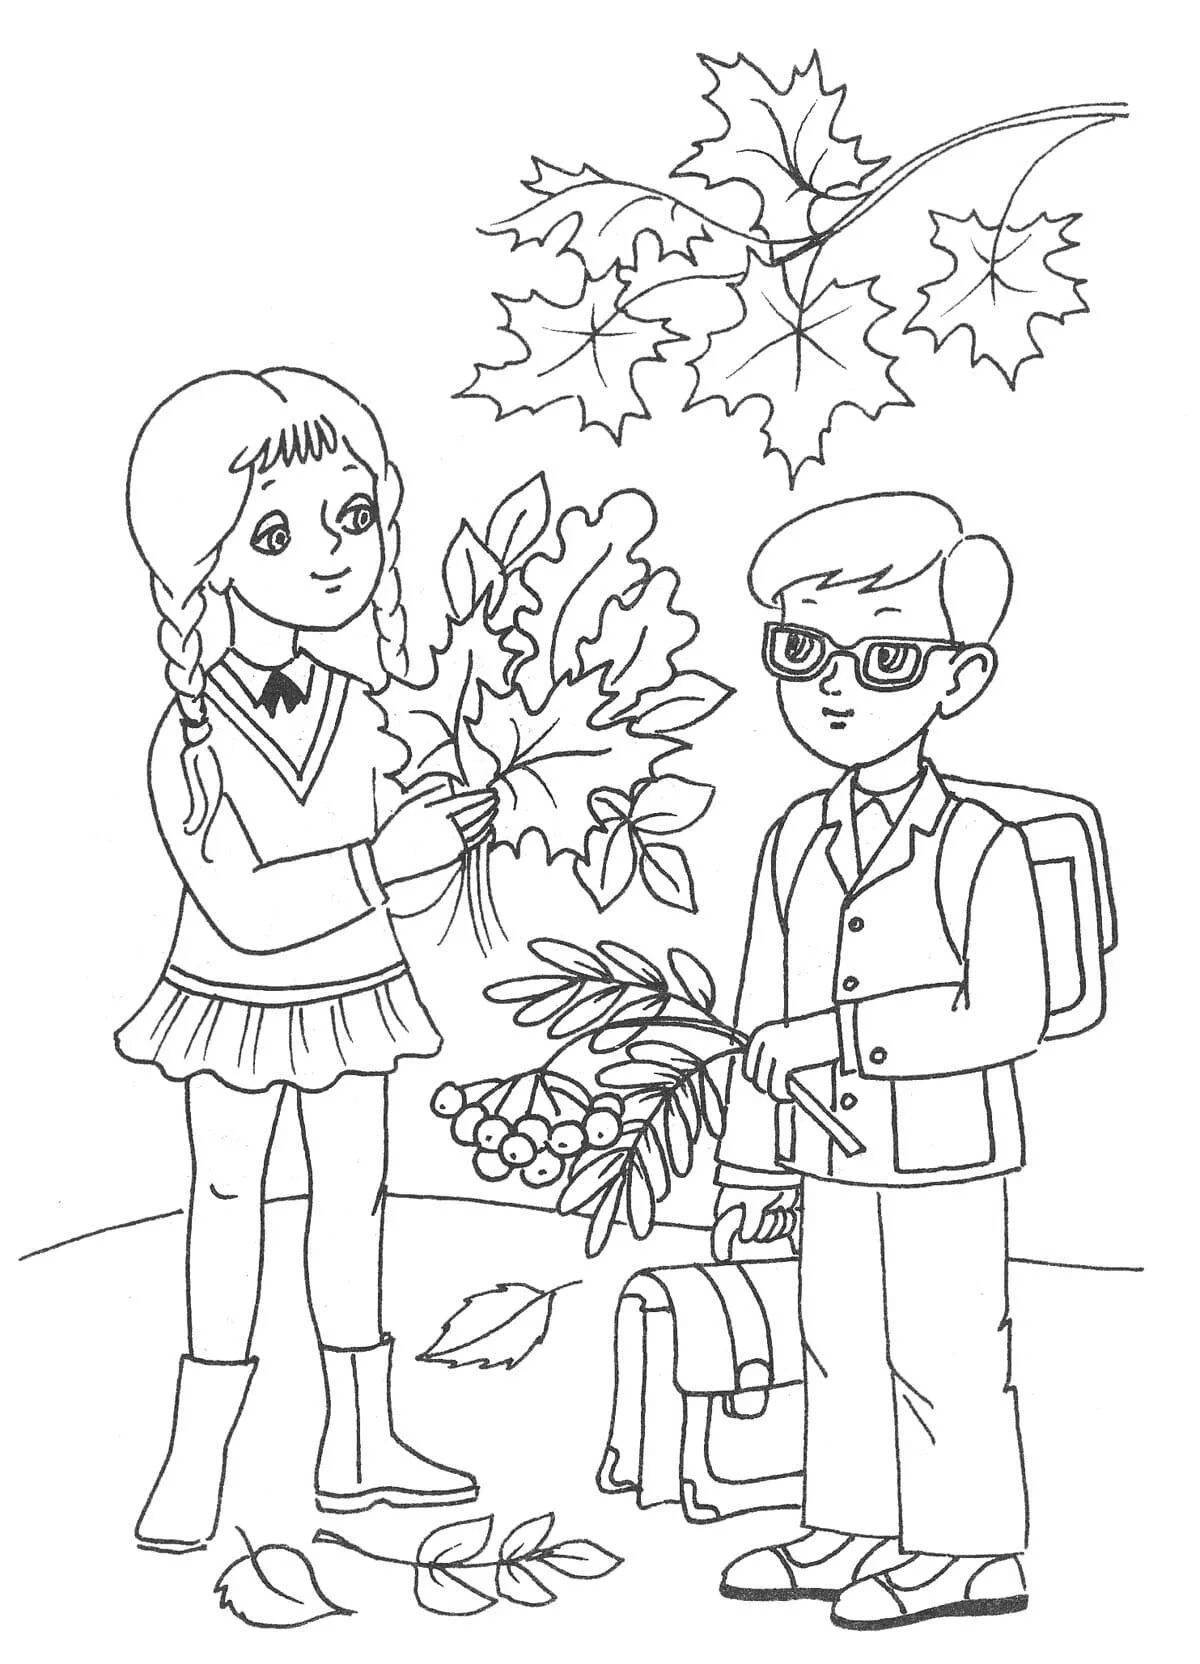 Fun coloring book for first graders